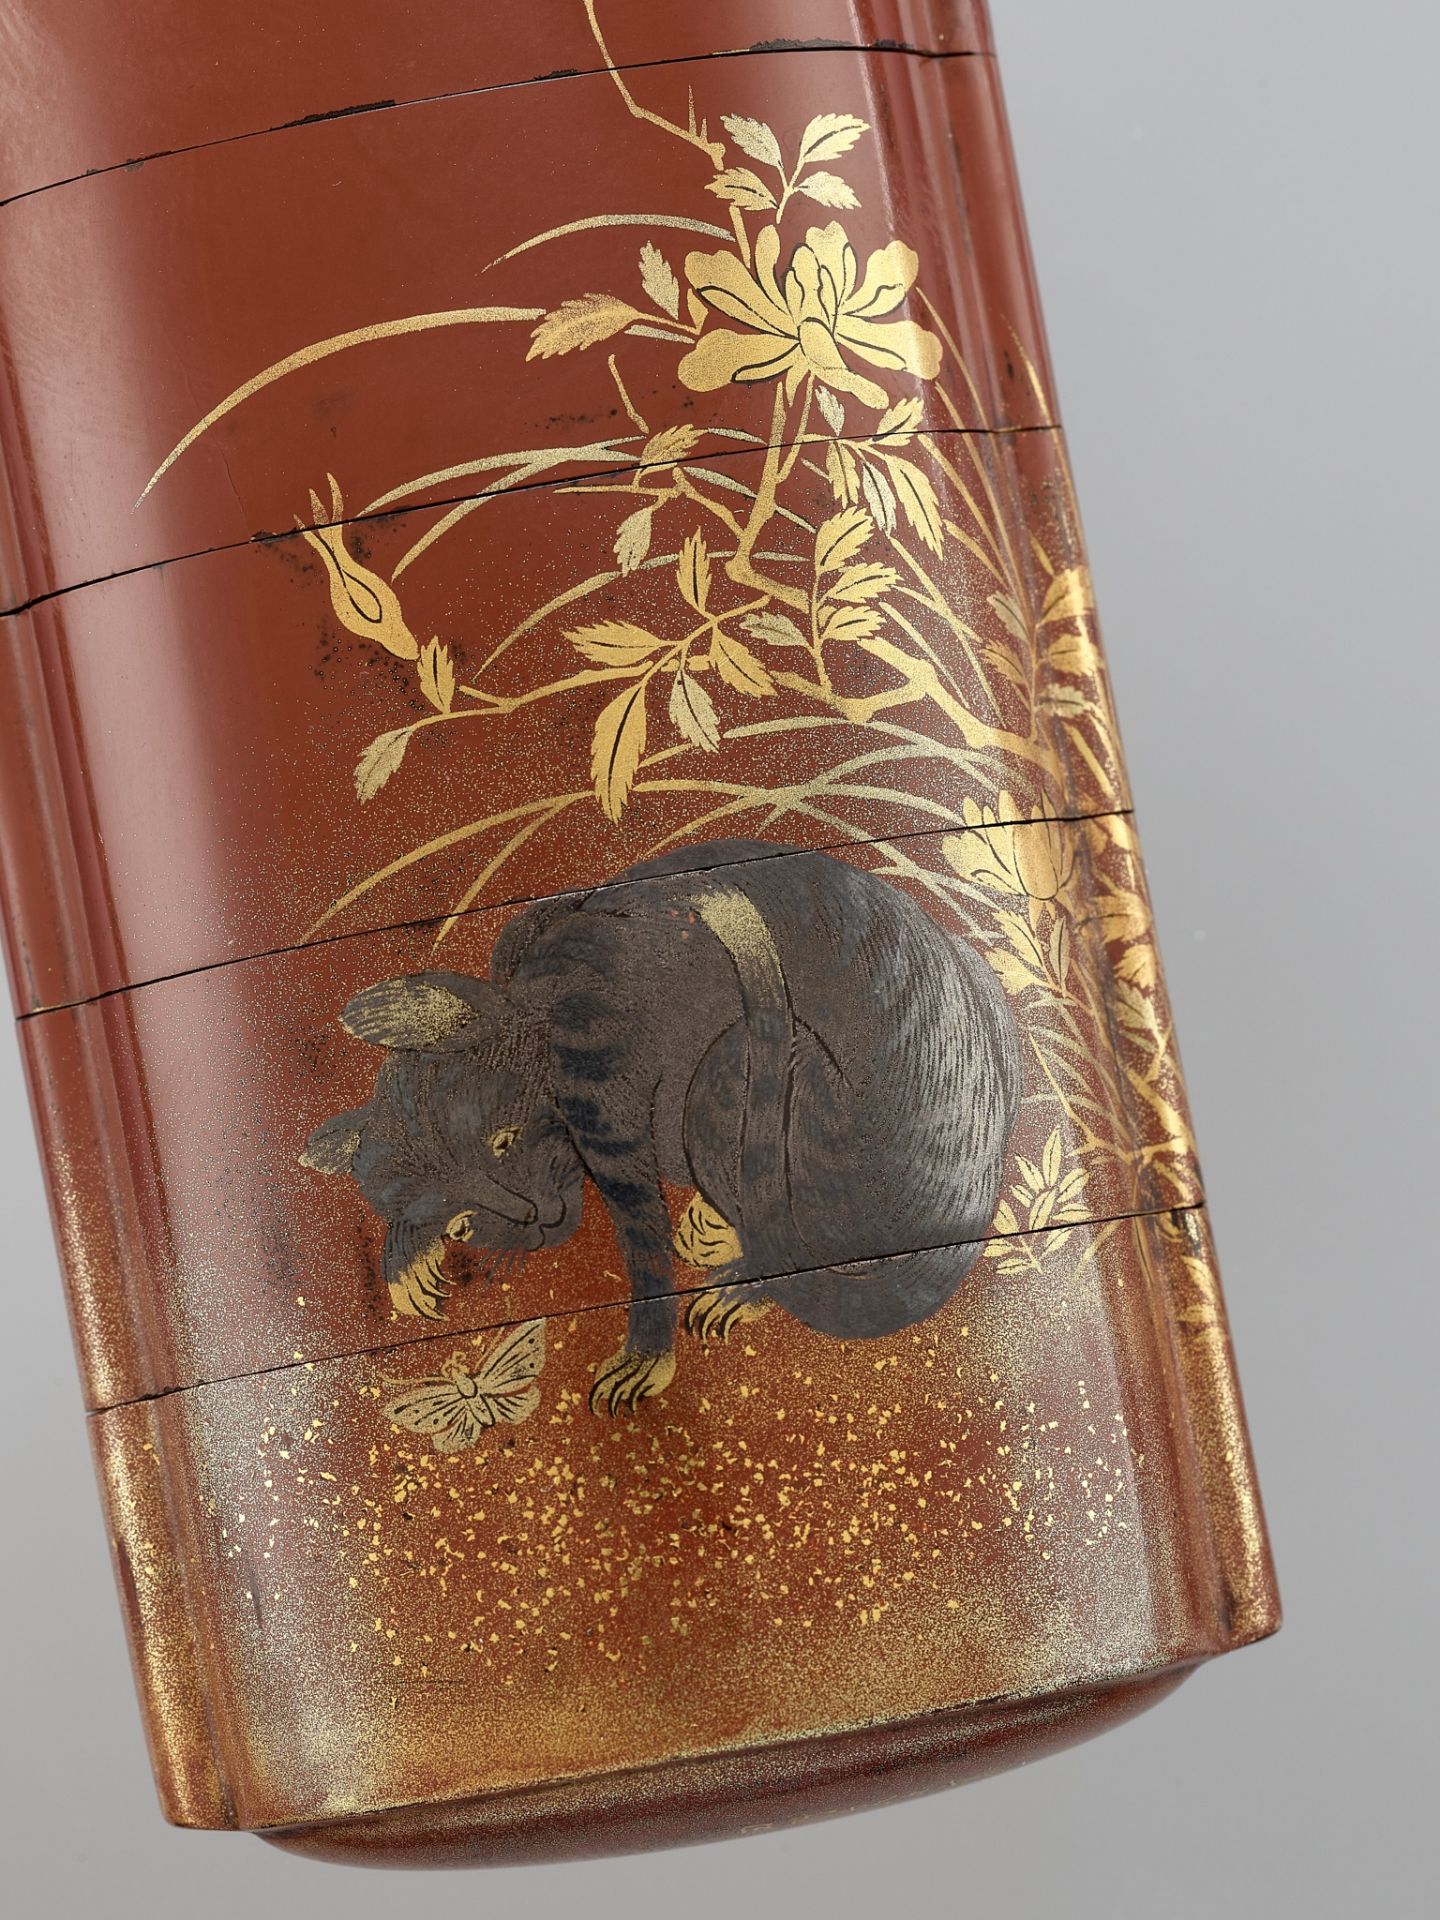 TATSUKE KOKOSAI: A RARE LACQUER FOUR-CASE INRO DEPICTING A CAT AND BUTTERFLY